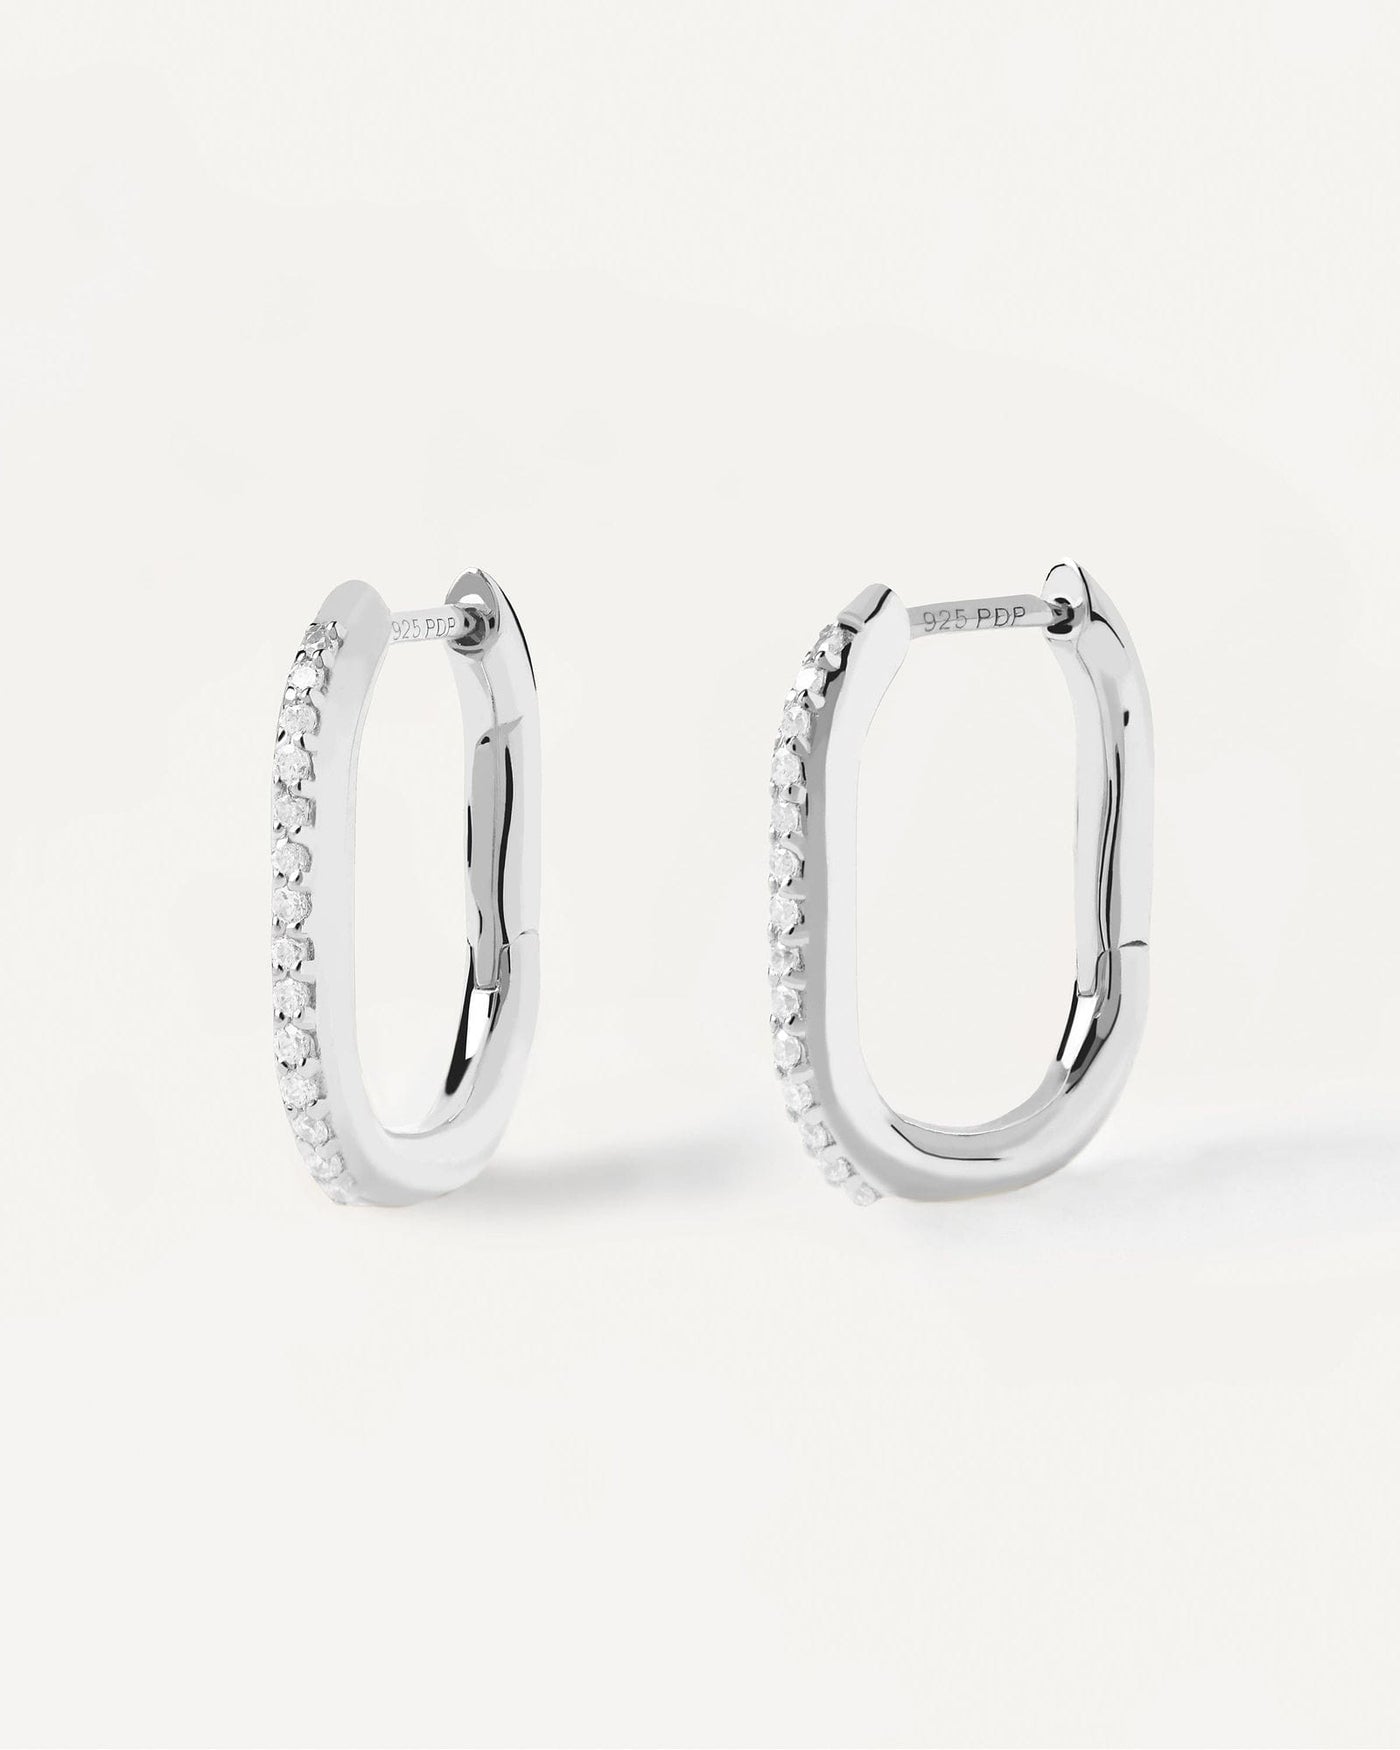 2024 Selection | Spike Silver Earrings. Oval sterling silver hoops with white zirconia. Get the latest arrival from PDPAOLA. Place your order safely and get this Best Seller. Free Shipping.